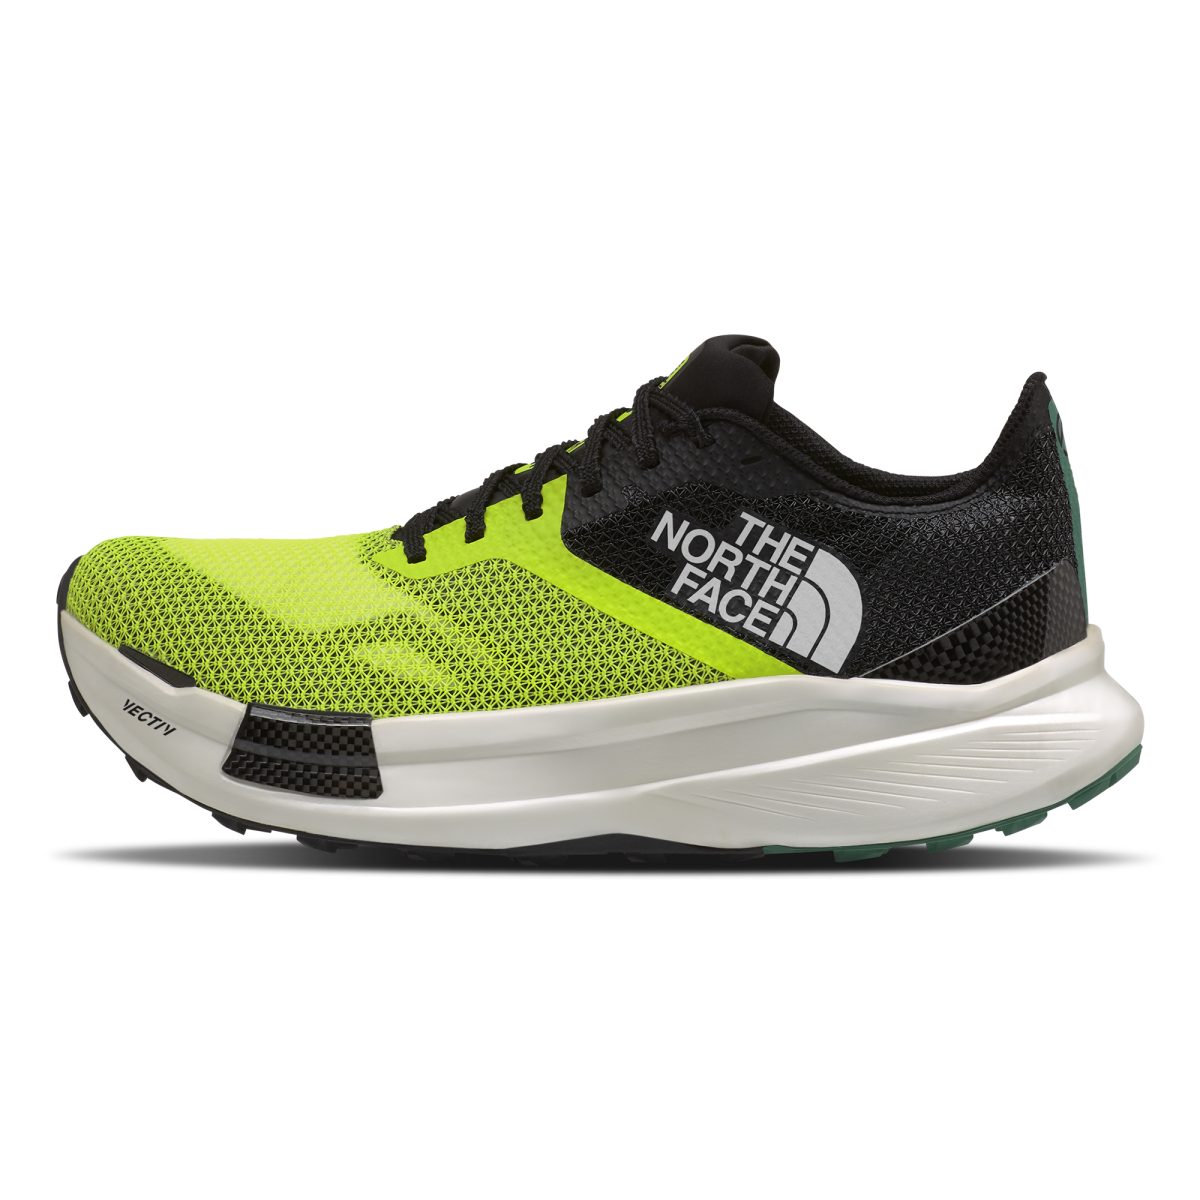 The North Face Men's Summit Series VECTIV Pro Trail Running Shoes